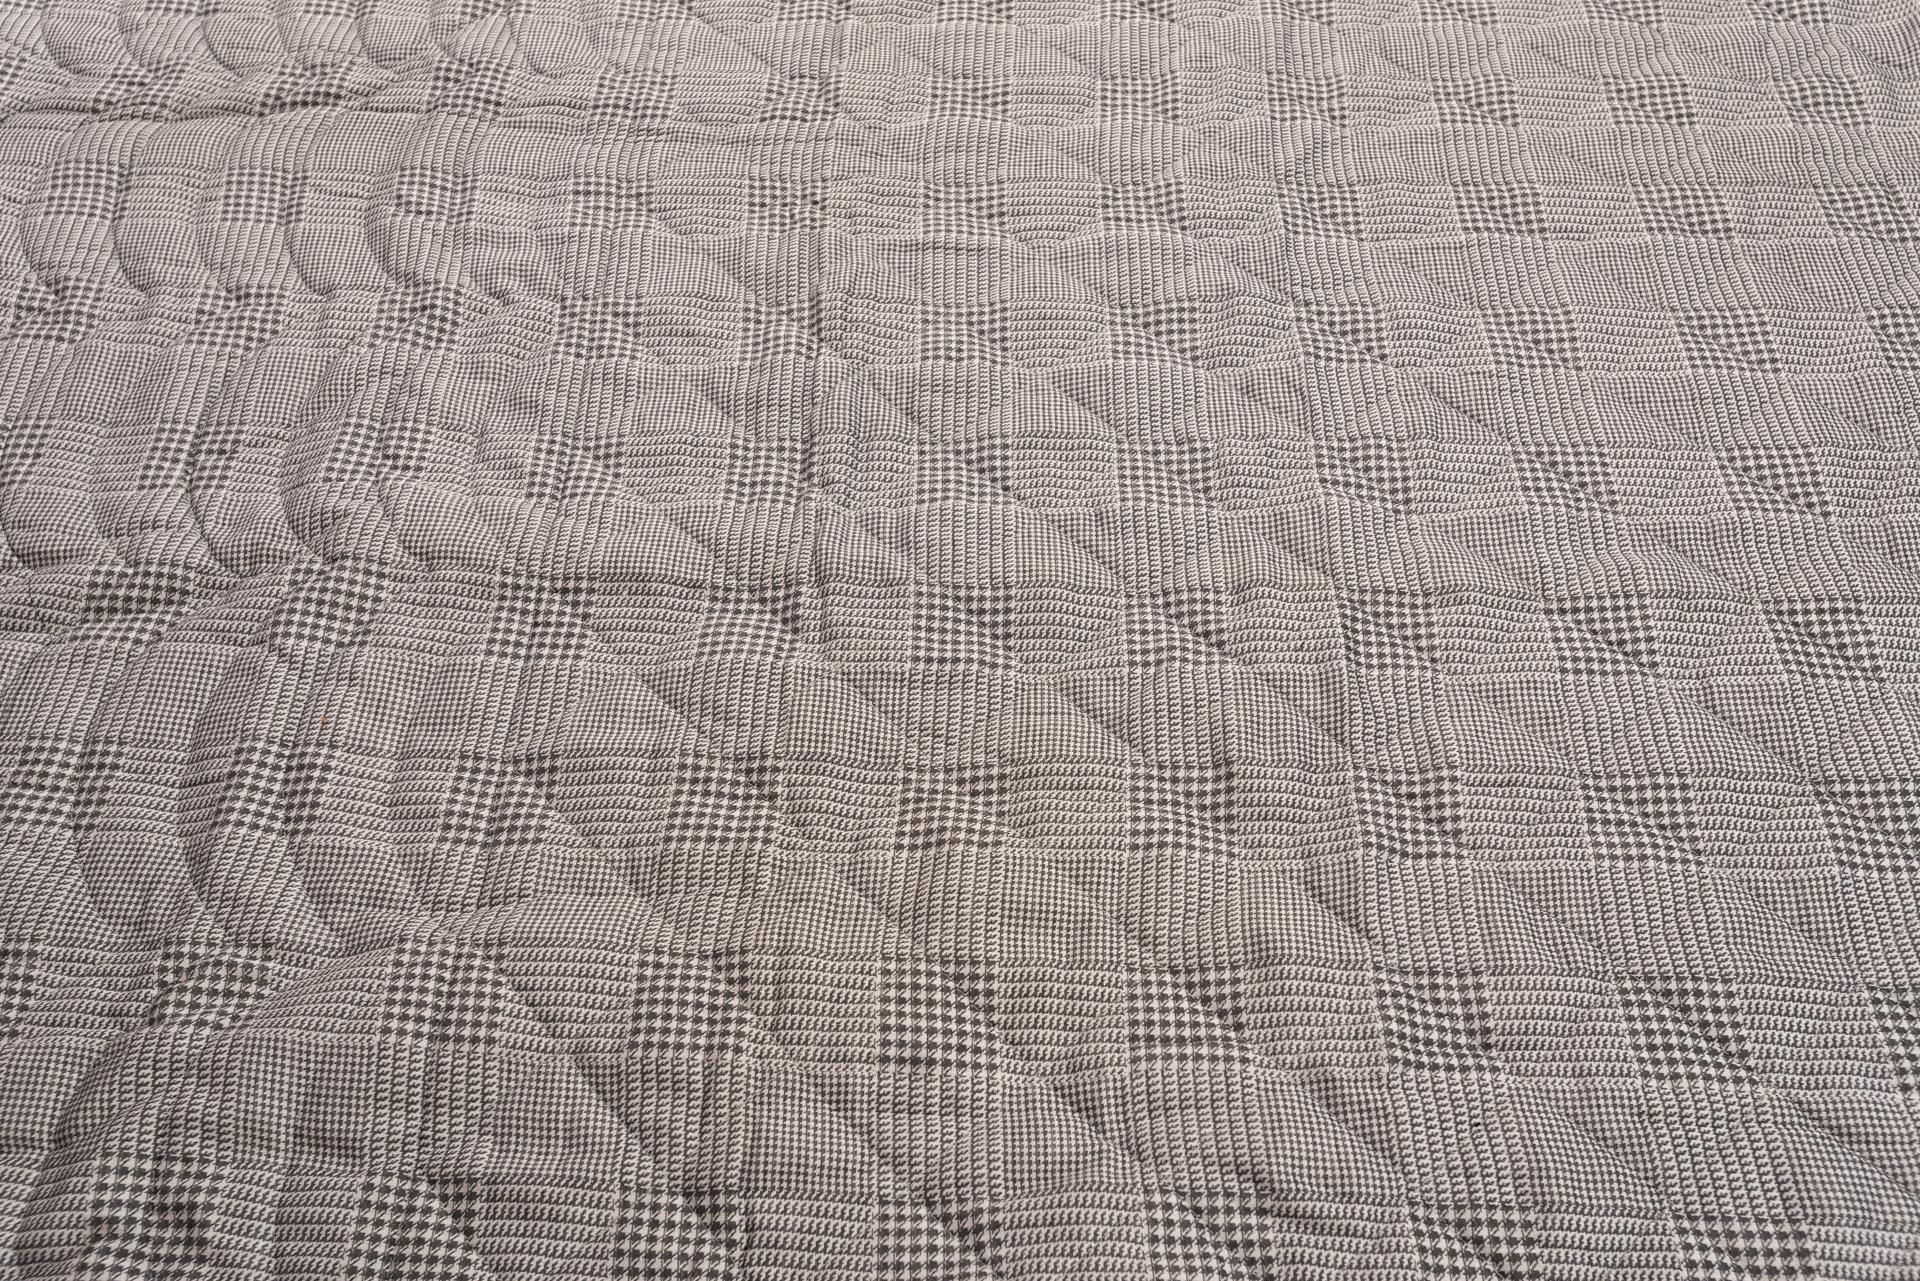 Bedspread Quilt in Prince of Galles Fabric In Excellent Condition For Sale In Alessandria, Piemonte